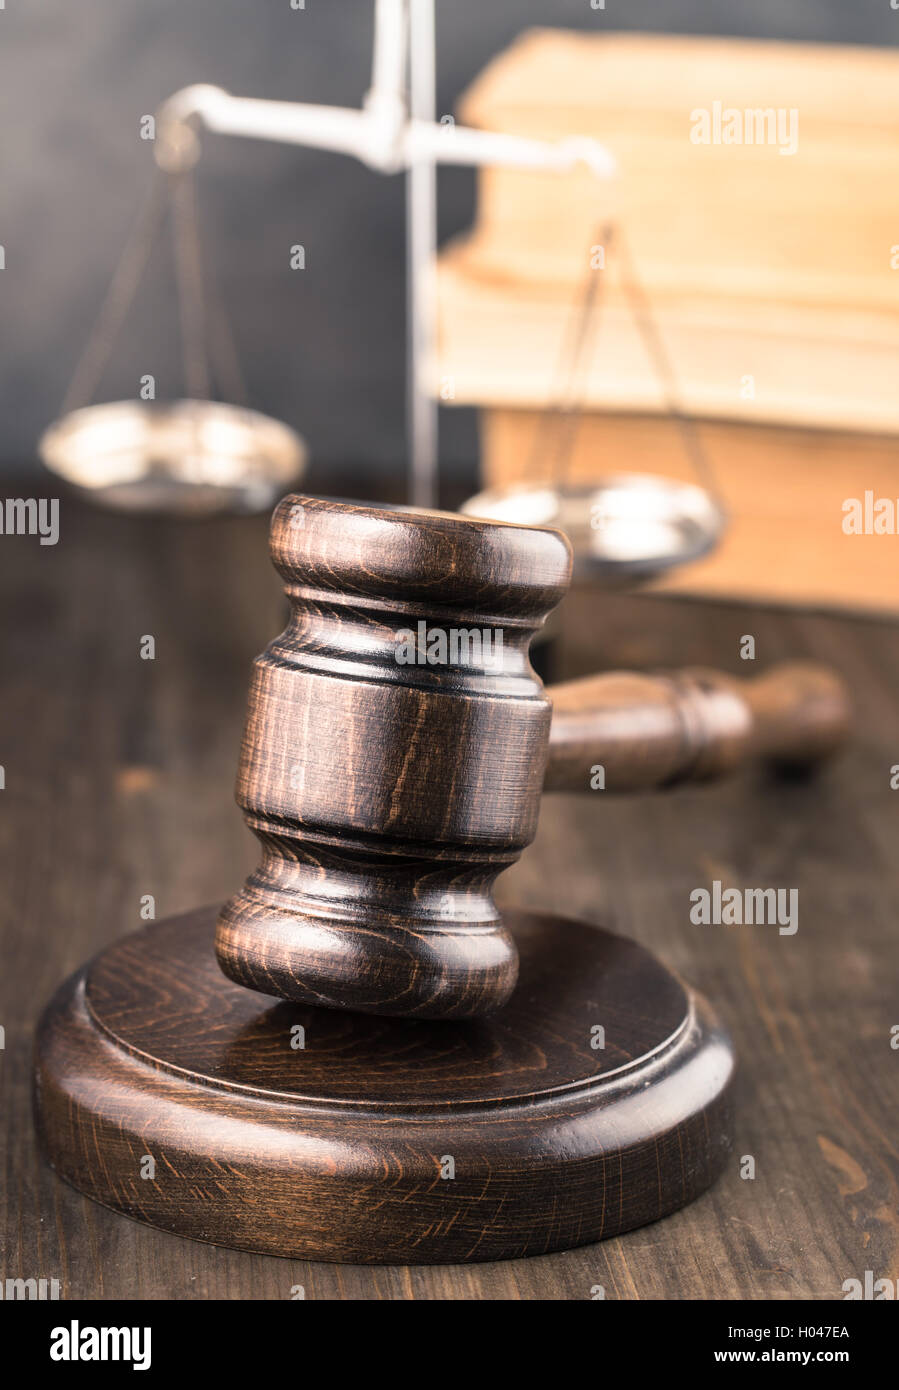 Wooden gavel on table Stock Photo